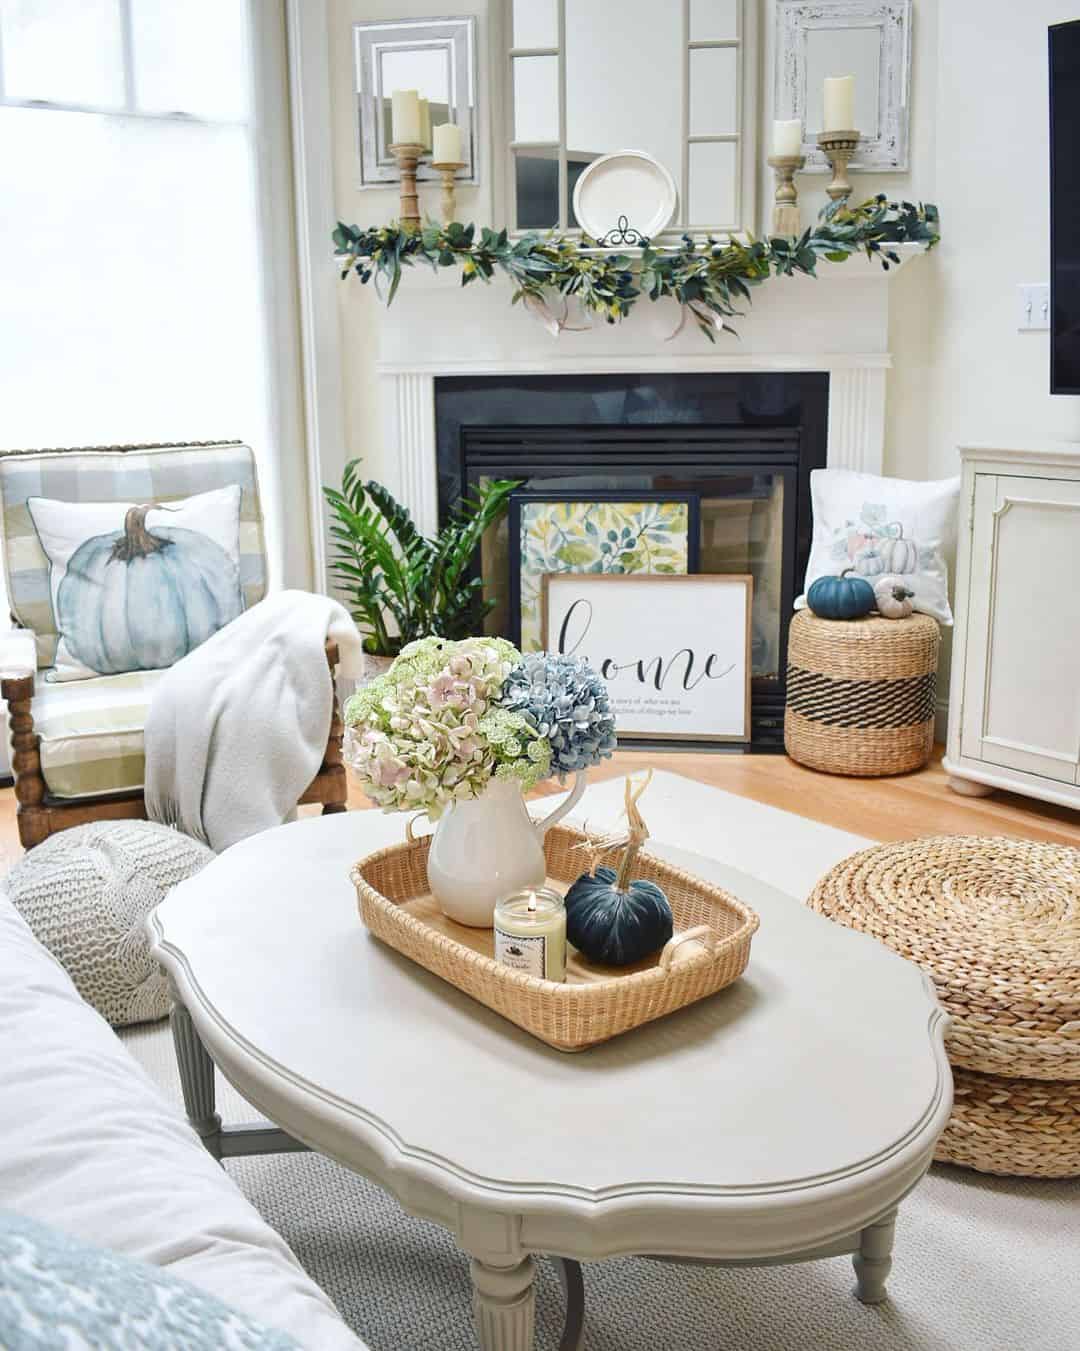 Fireplace Seating in White and Blue - Soul & Lane